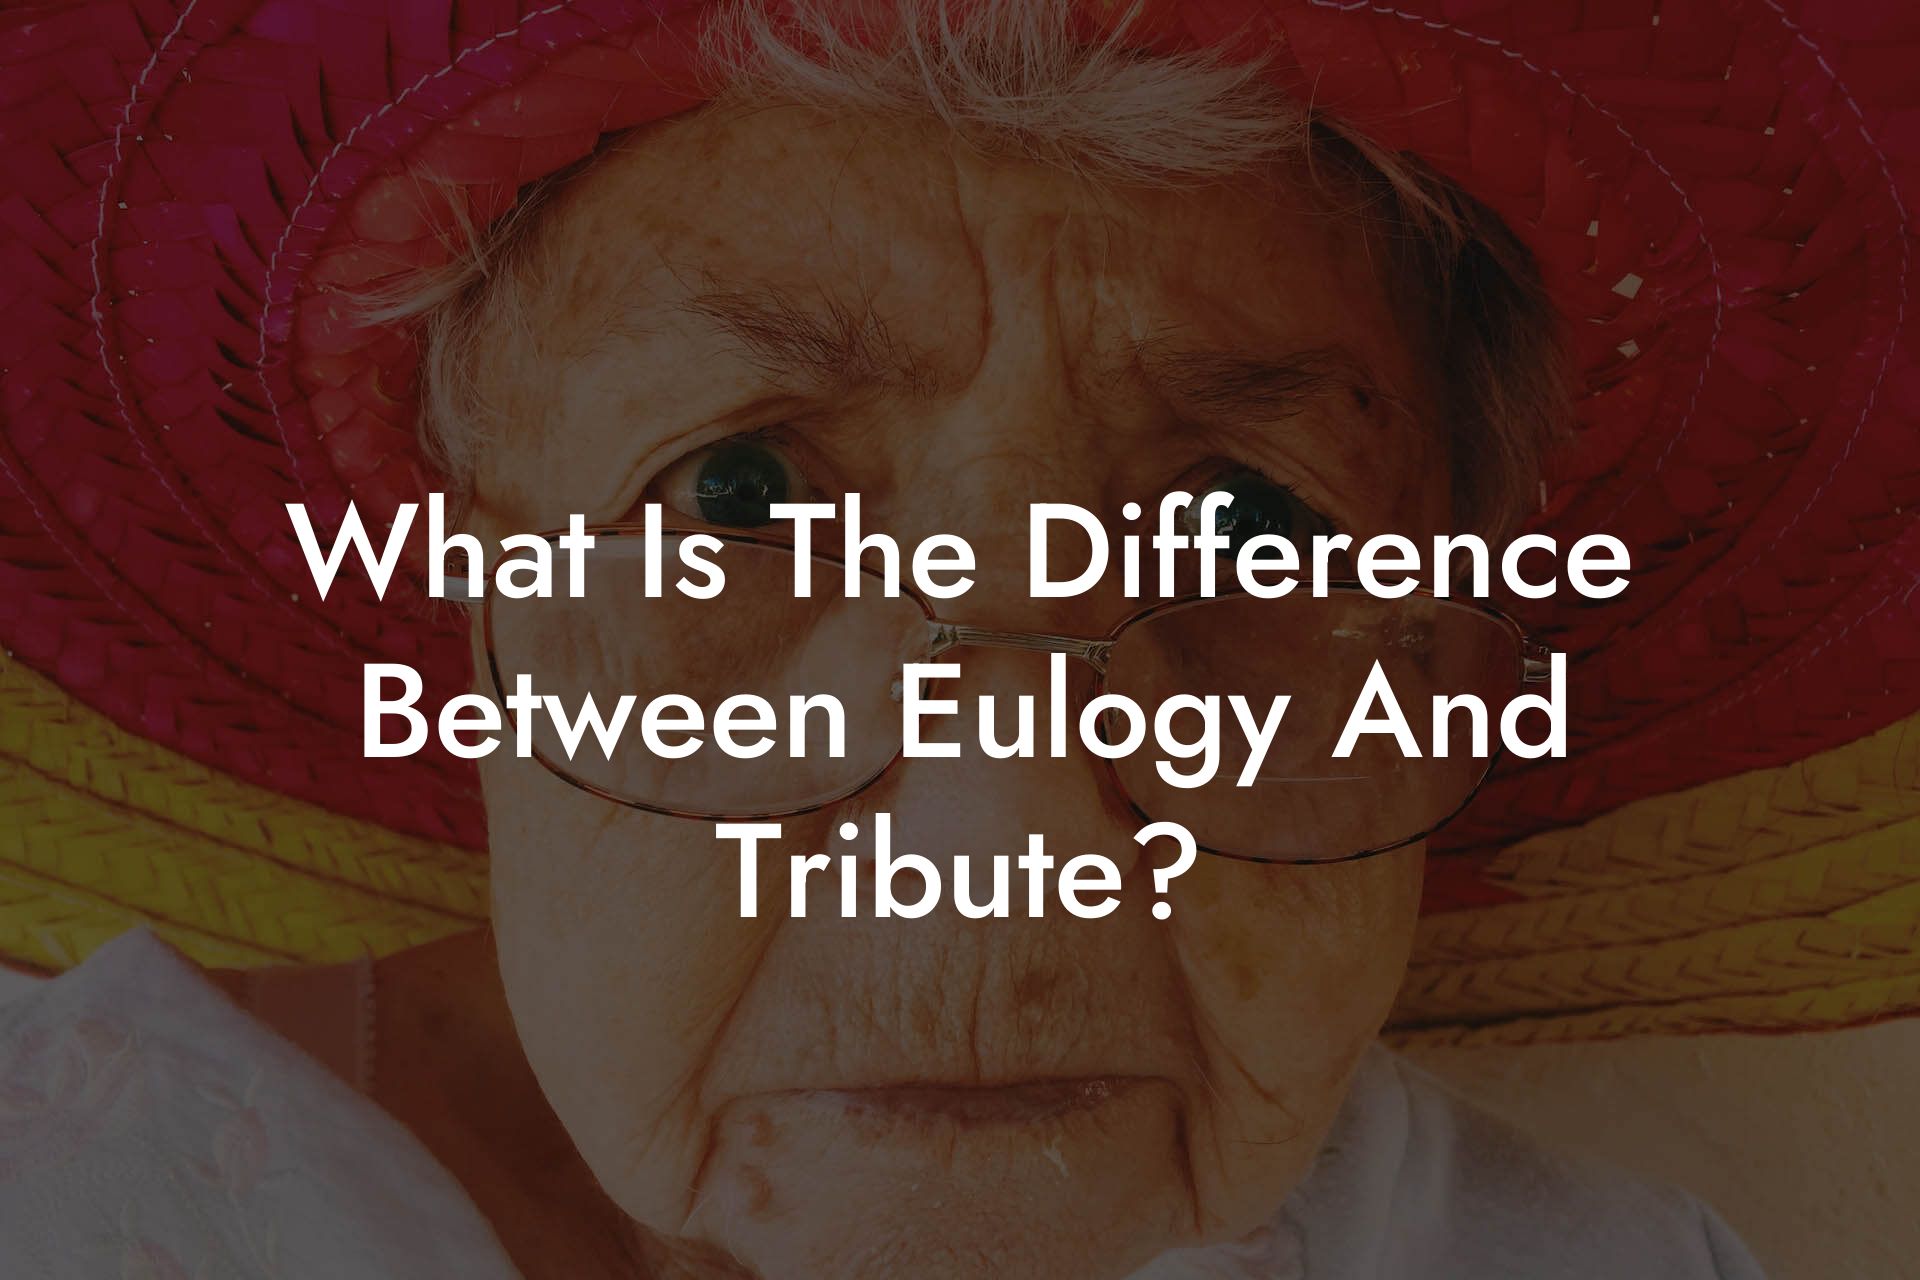 What Is The Difference Between Eulogy And Tribute